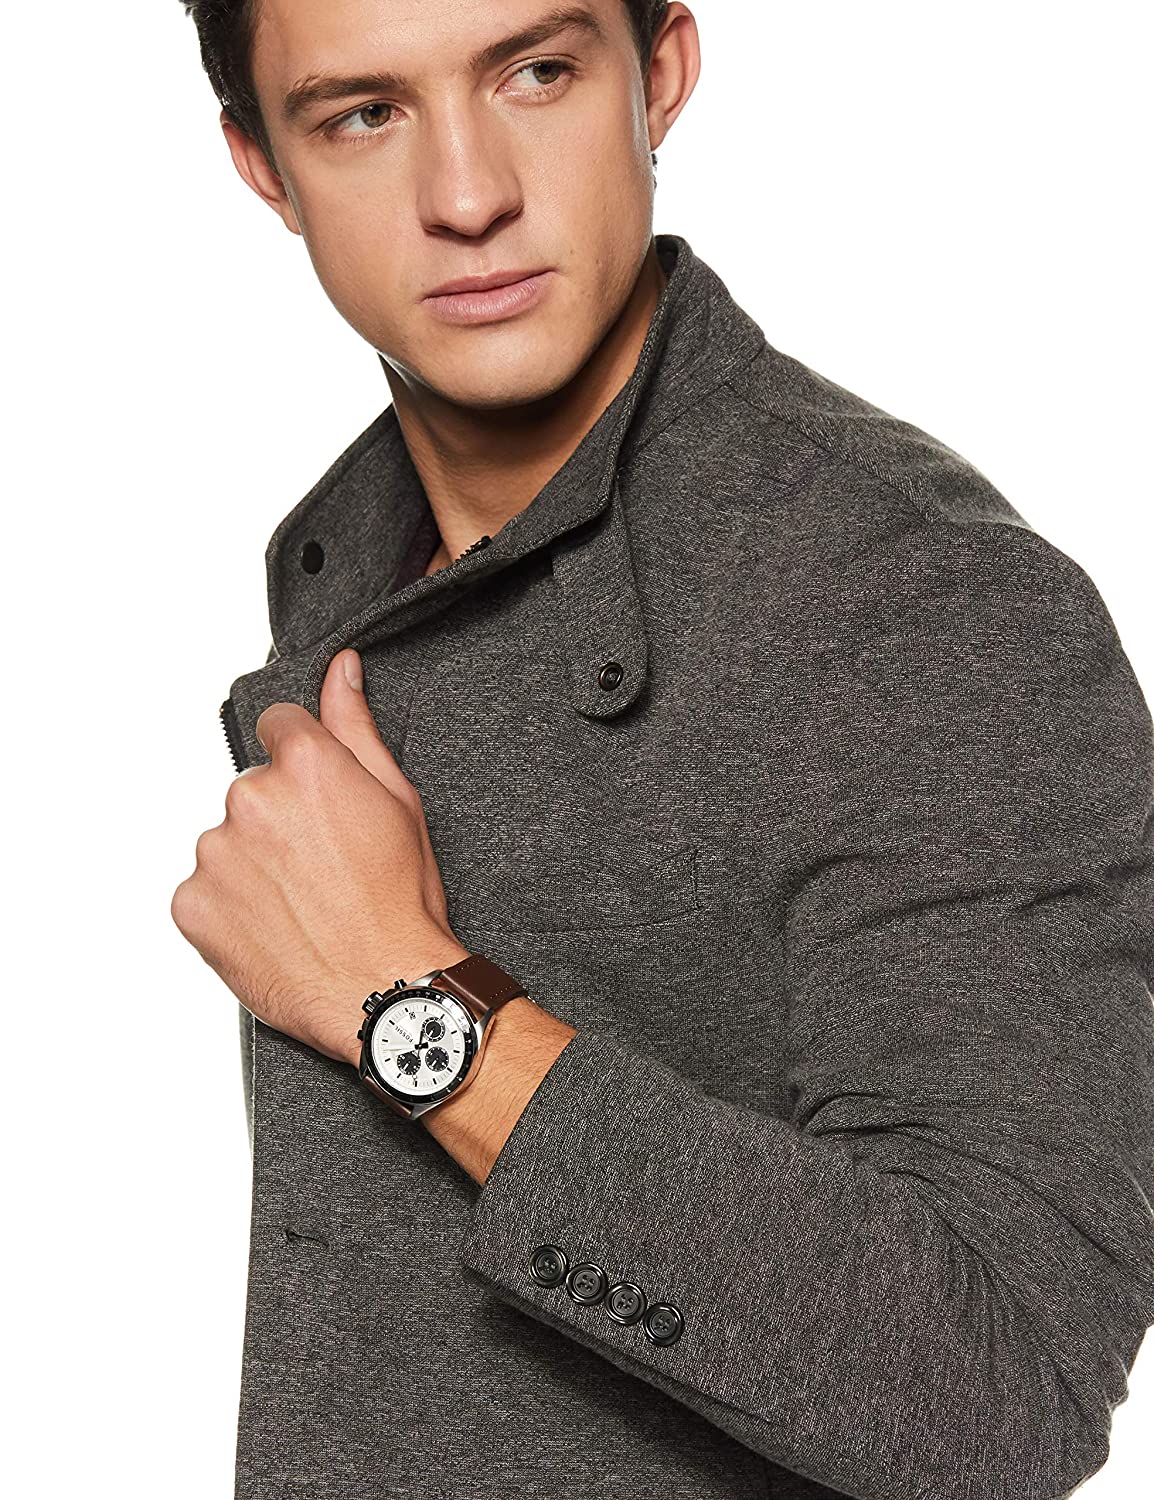 Choose from the Most Trending Watches for Men